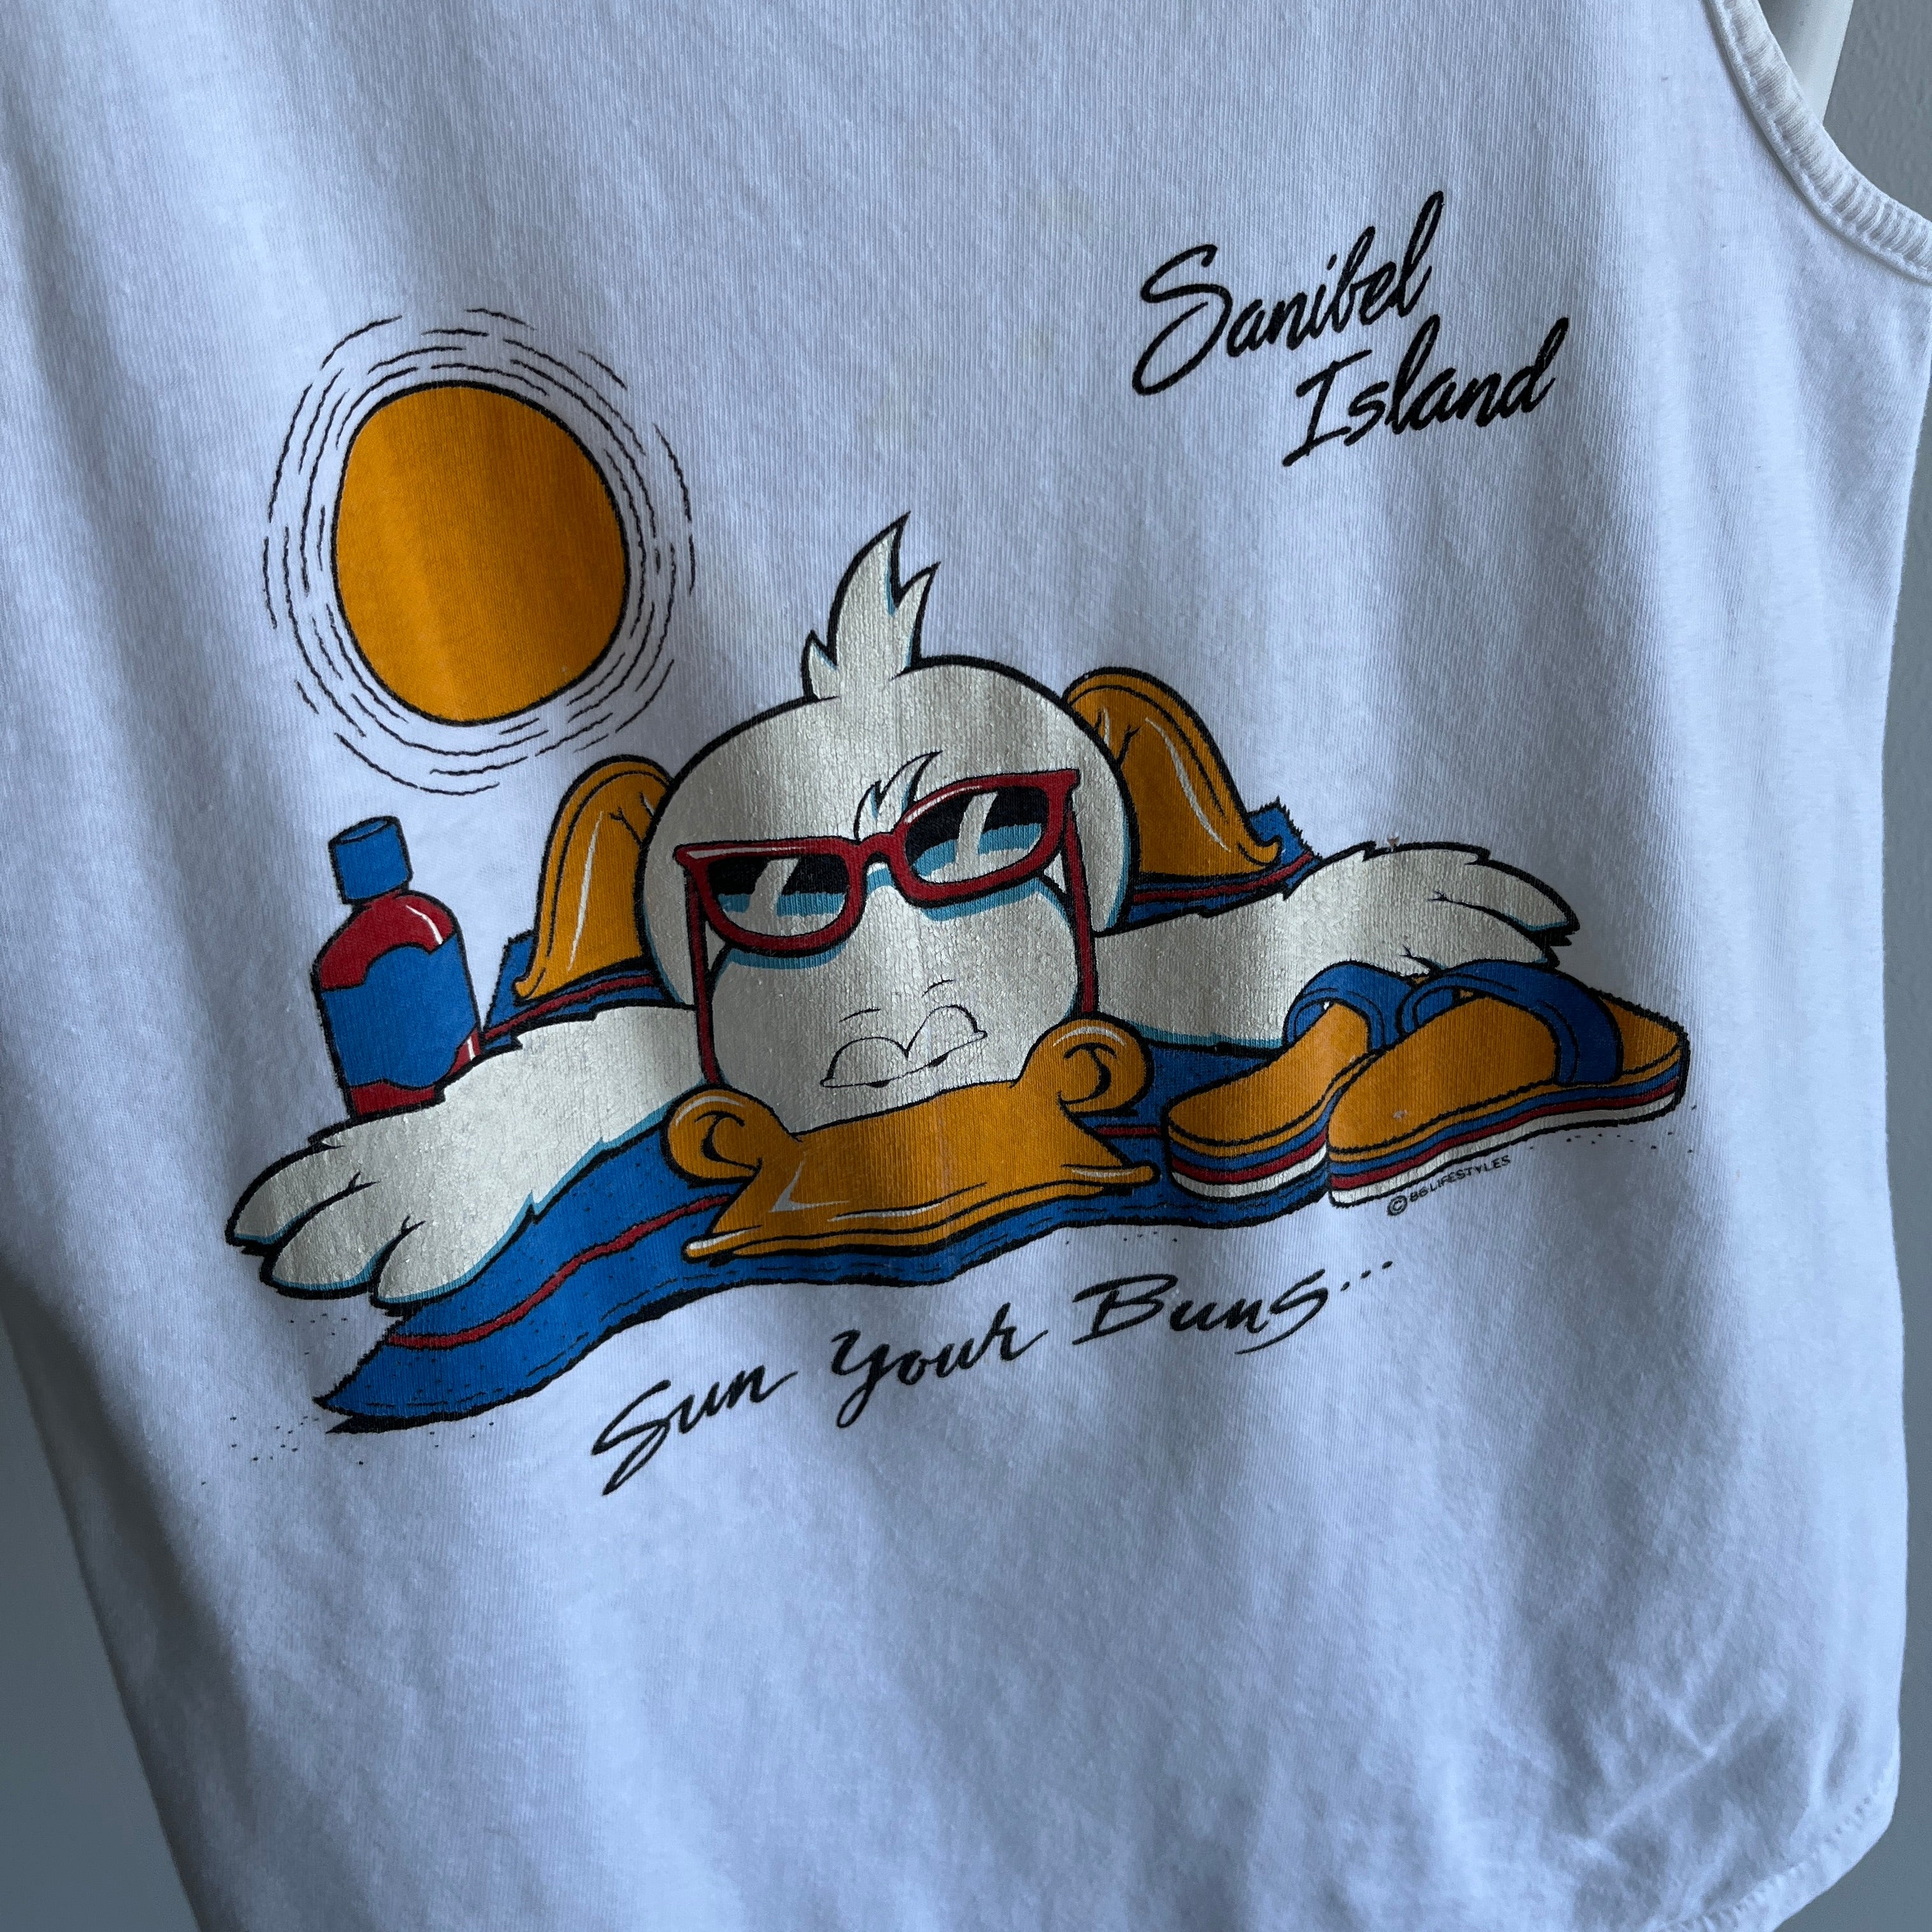 1986 Sanibel Island Sun Your Buns (Check out The Back Side) Tank Top